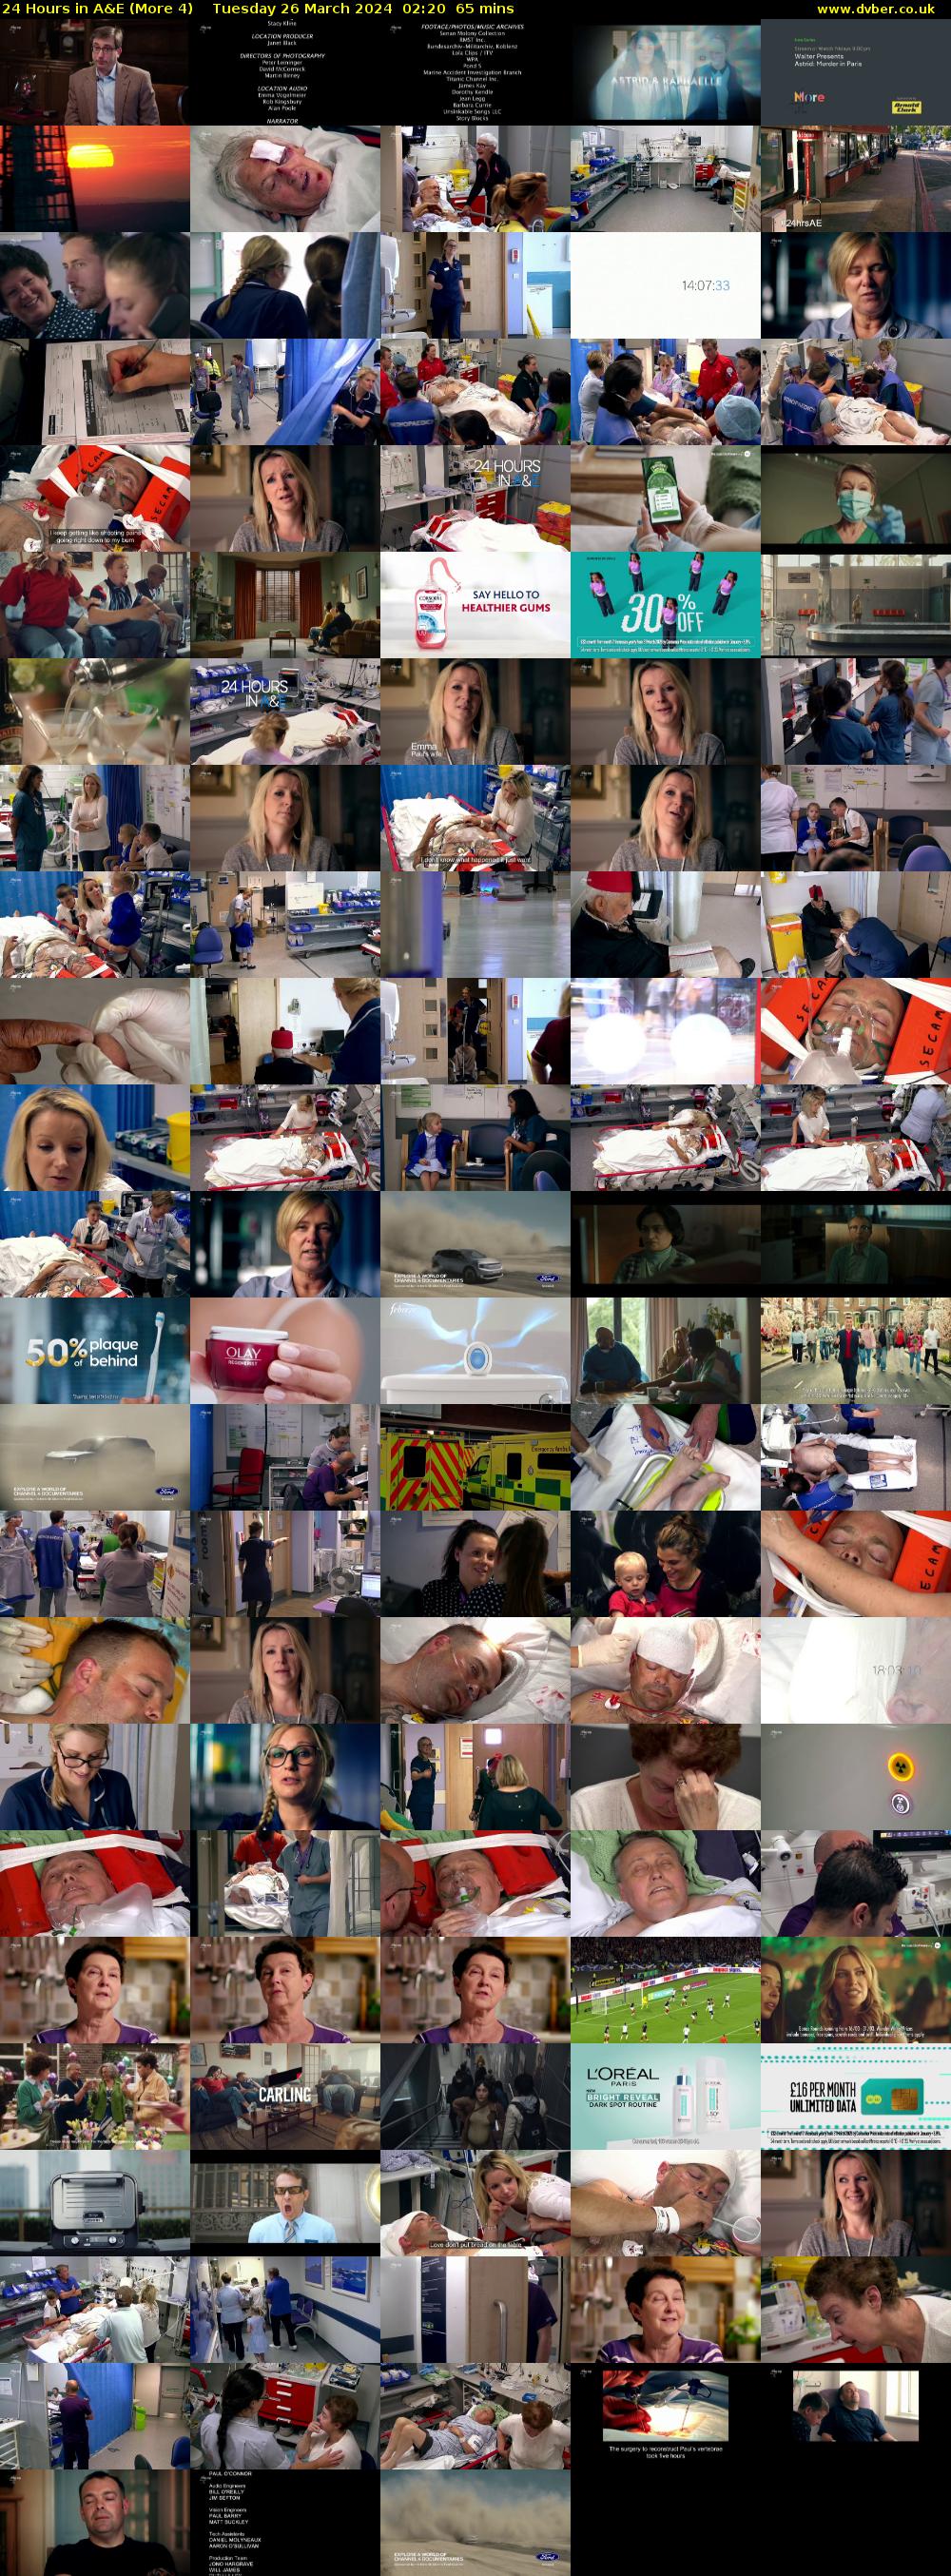 24 Hours in A&E (More 4) Tuesday 26 March 2024 02:20 - 03:25